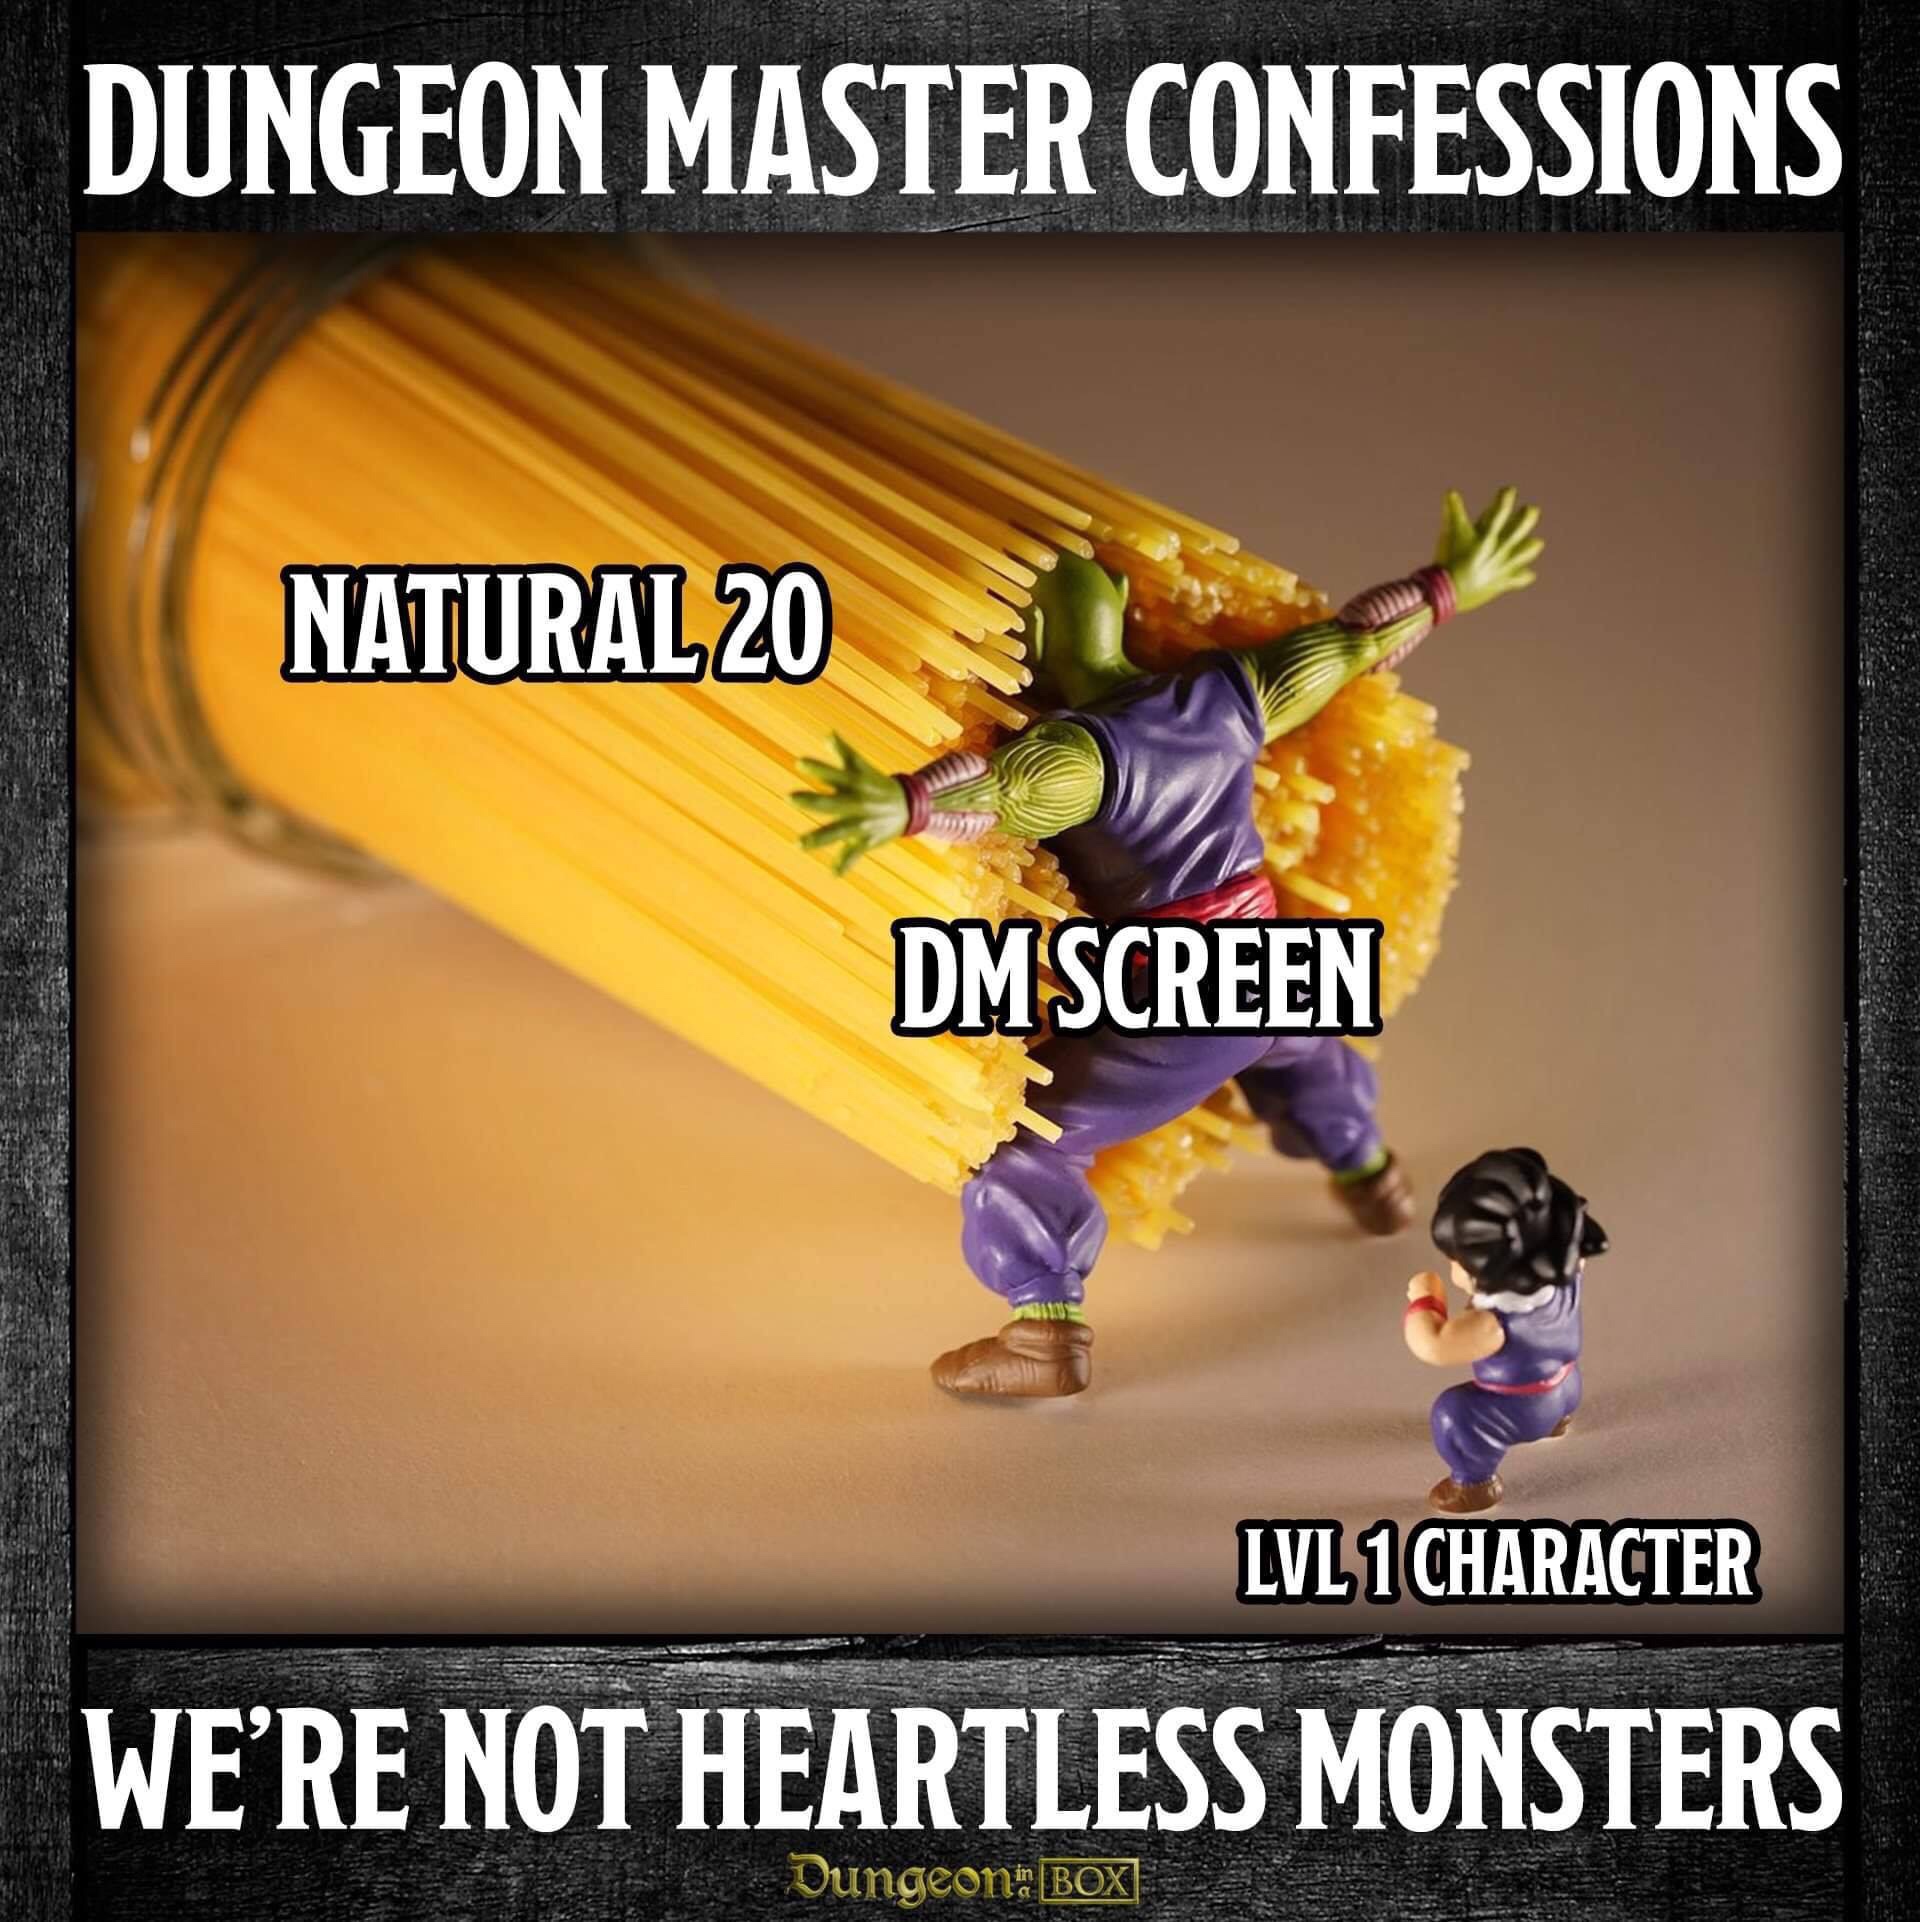 photo caption - Dungeon Master Confessions Natural 20 Dm Screen Lvl 1 Character We'Re Not Heartless Monsters Dungeons Box